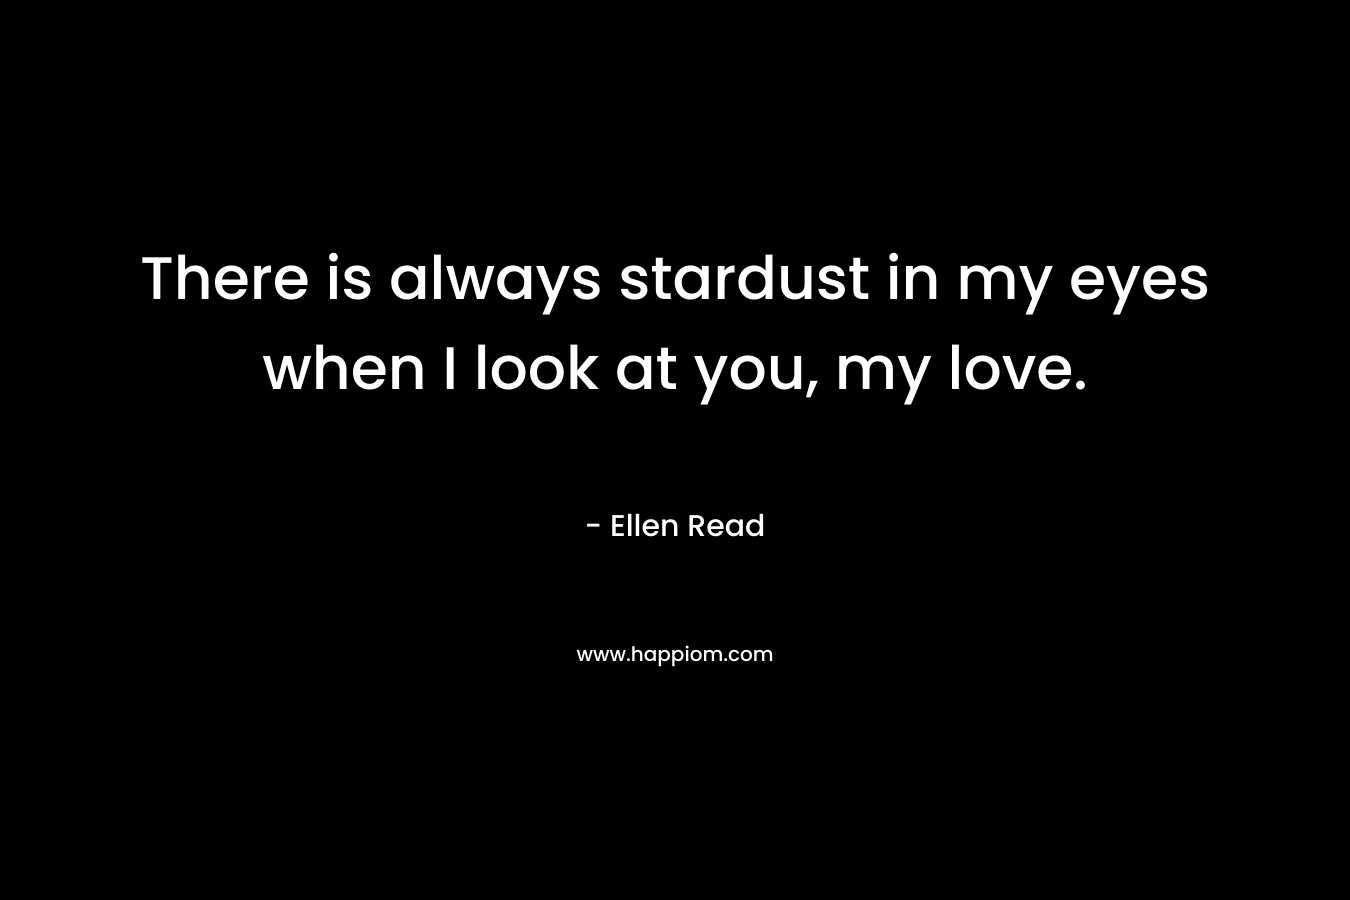 There is always stardust in my eyes when I look at you, my love. – Ellen Read